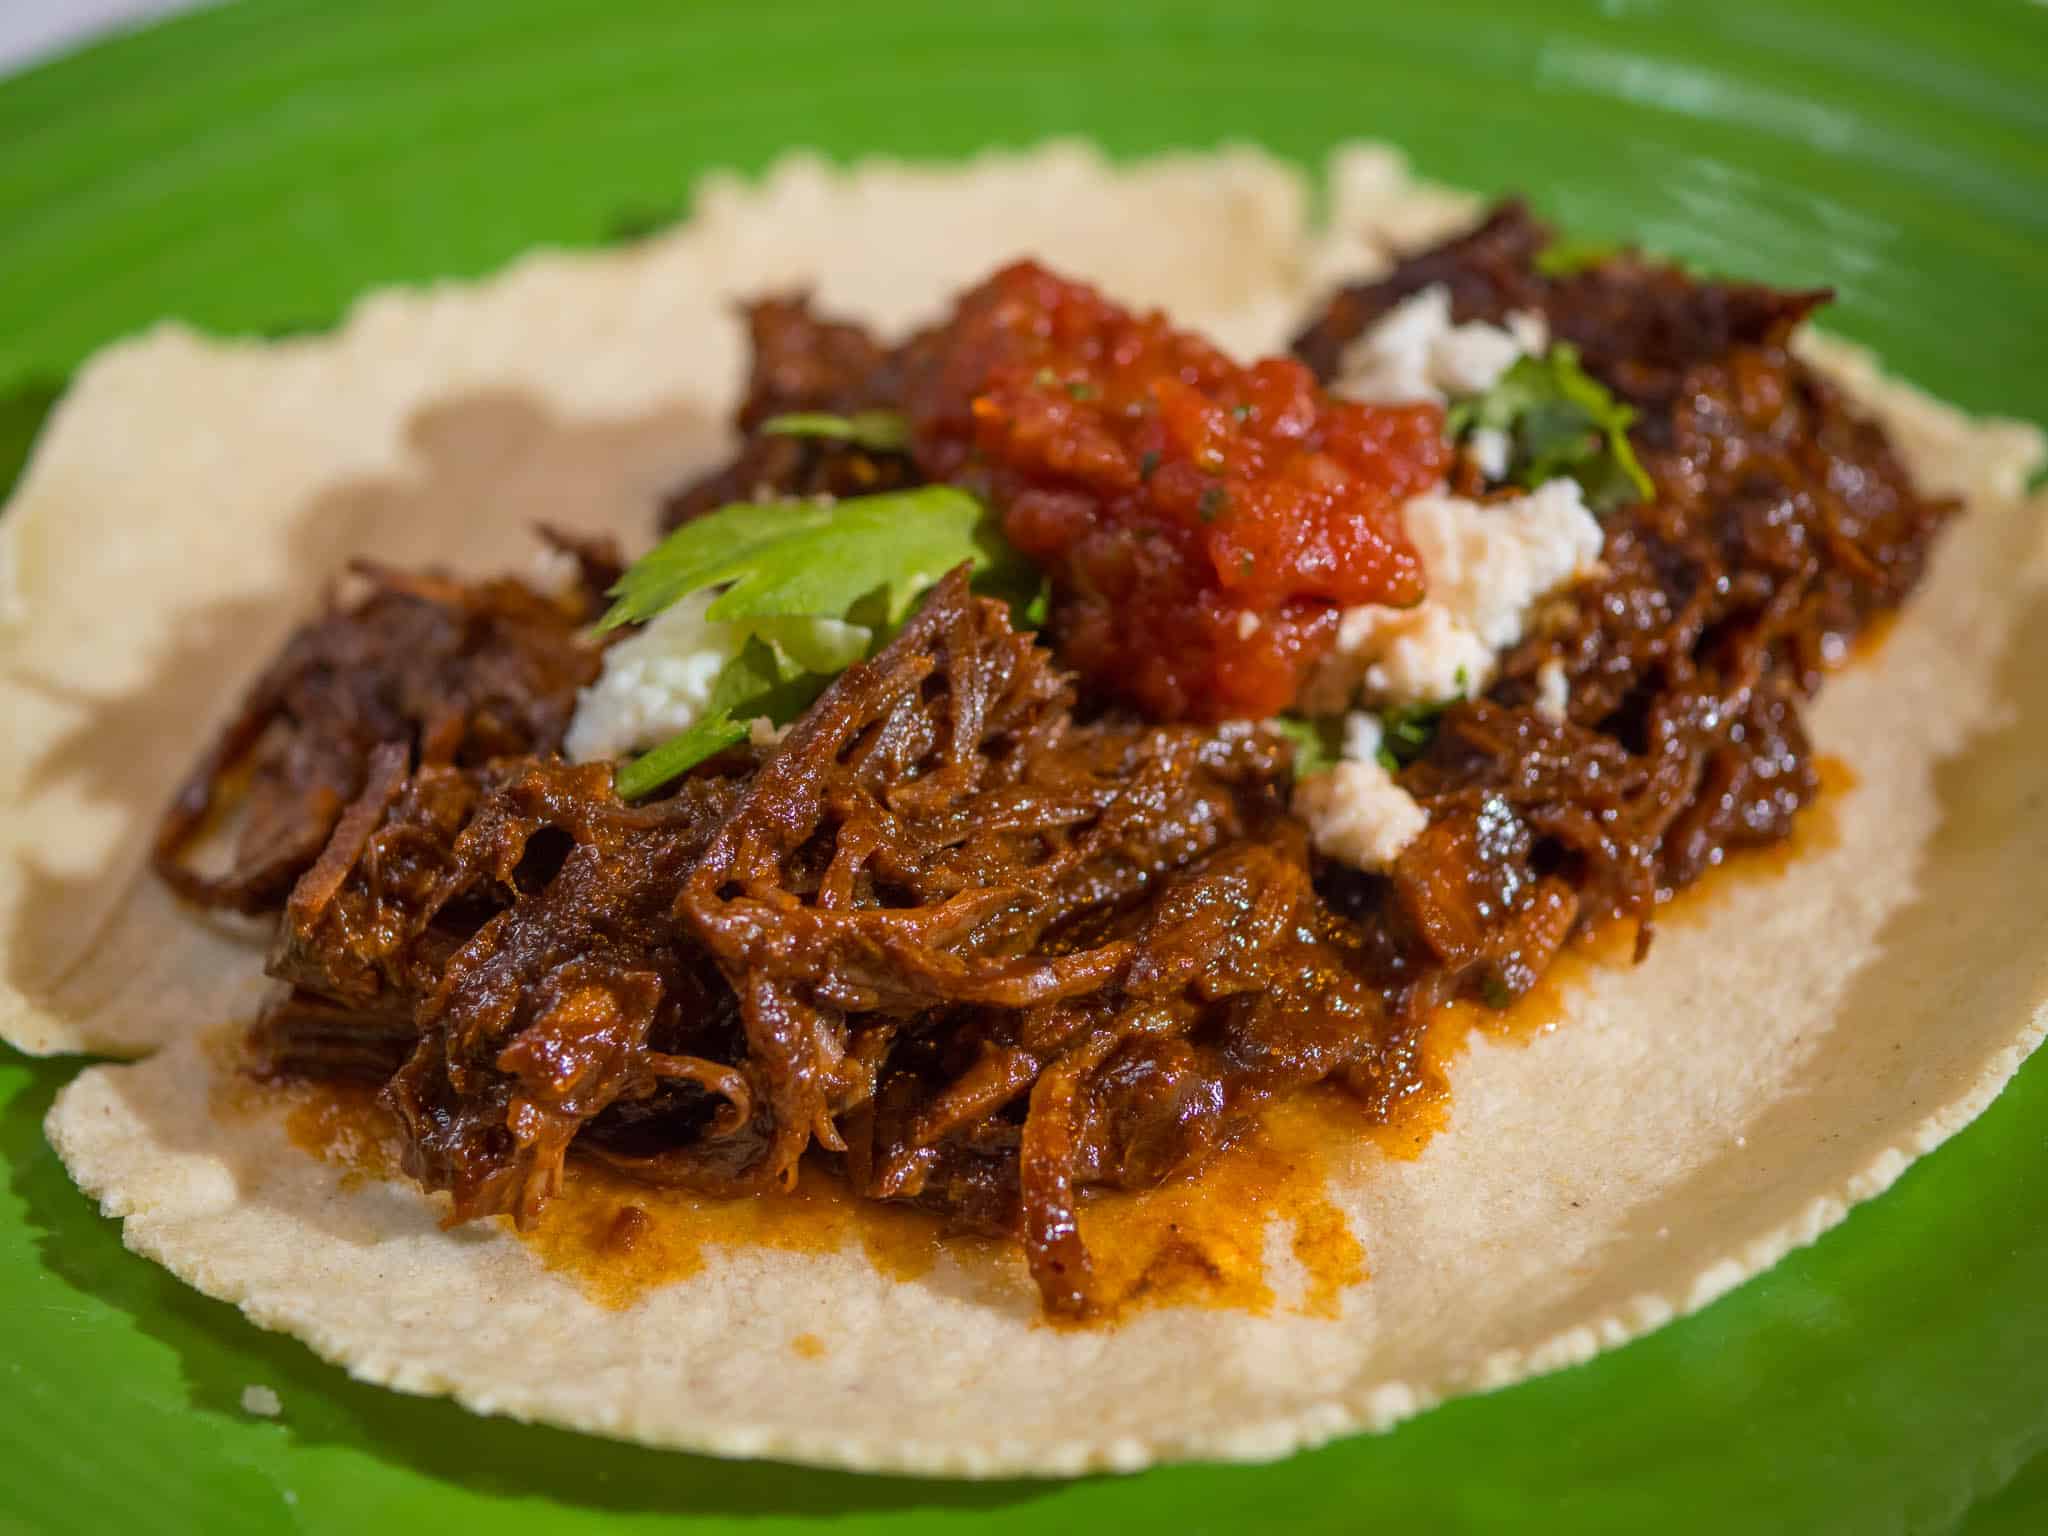 A pile of shredded beef in chile sauce piled on a corn tortilla, and topped with cheese, salsa, and cilantro.